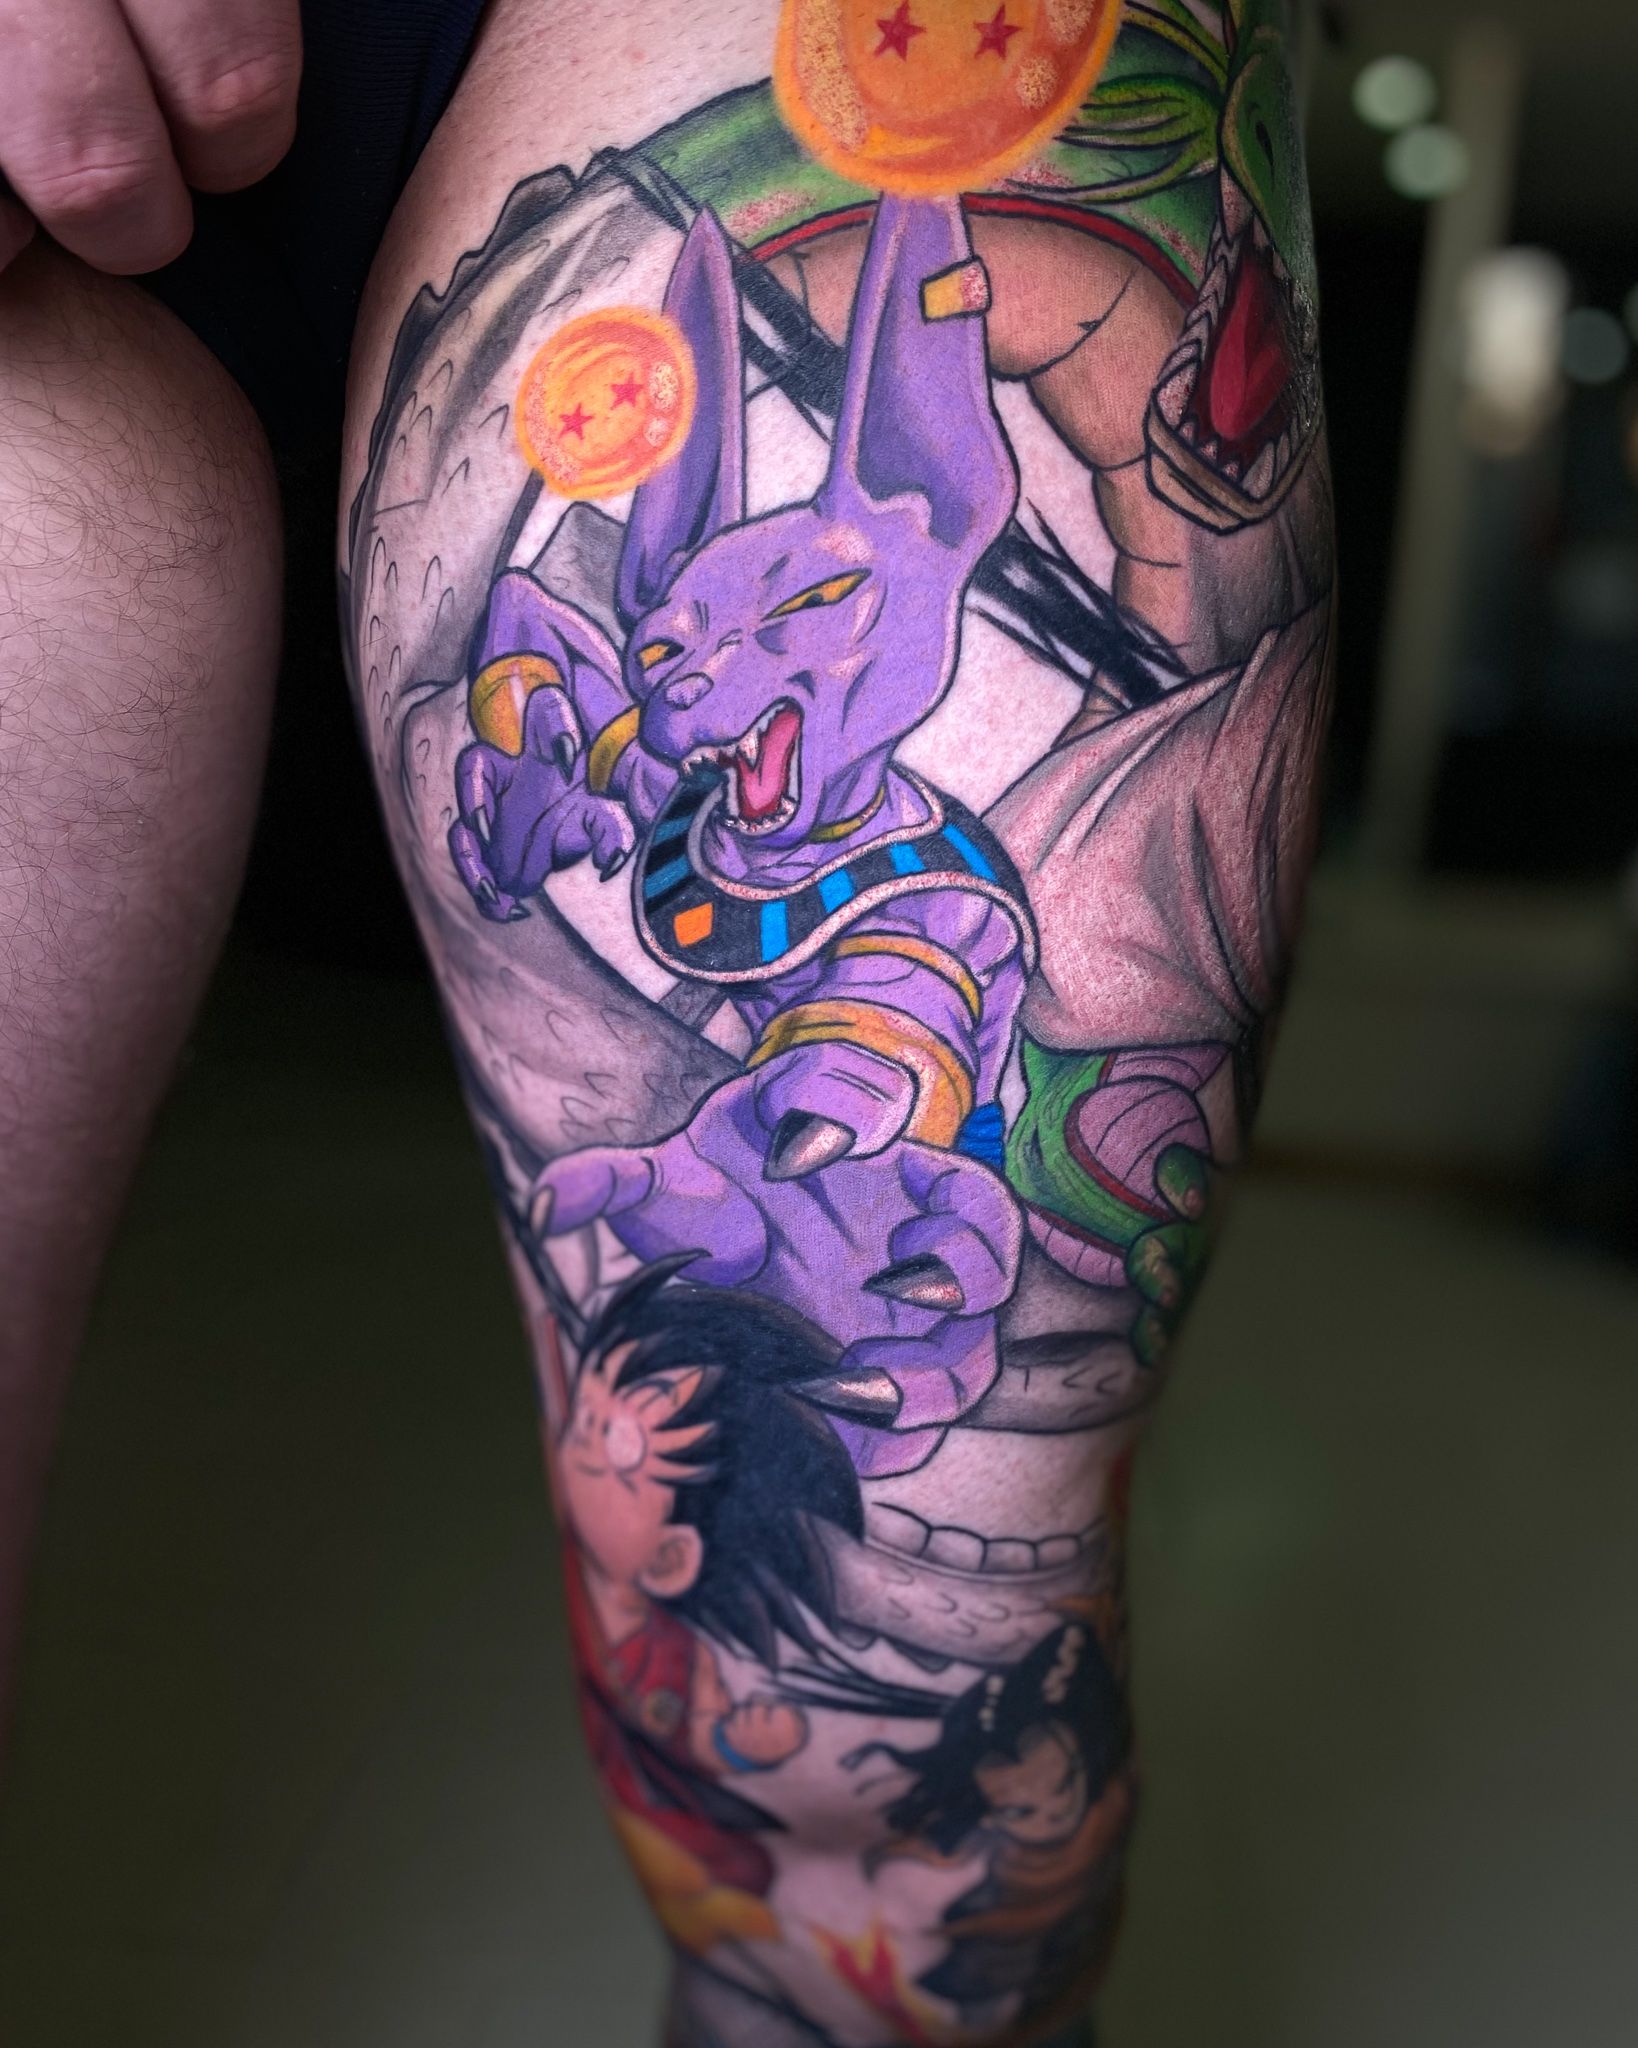 Heebee Jeebees Tattoos  Super fun hungry joyous Beerus from Dbz More DBZ  pieces please done by redbarrontattoos  Thanks for letting me do it  xpokeprincxss     tattoo tattoos 